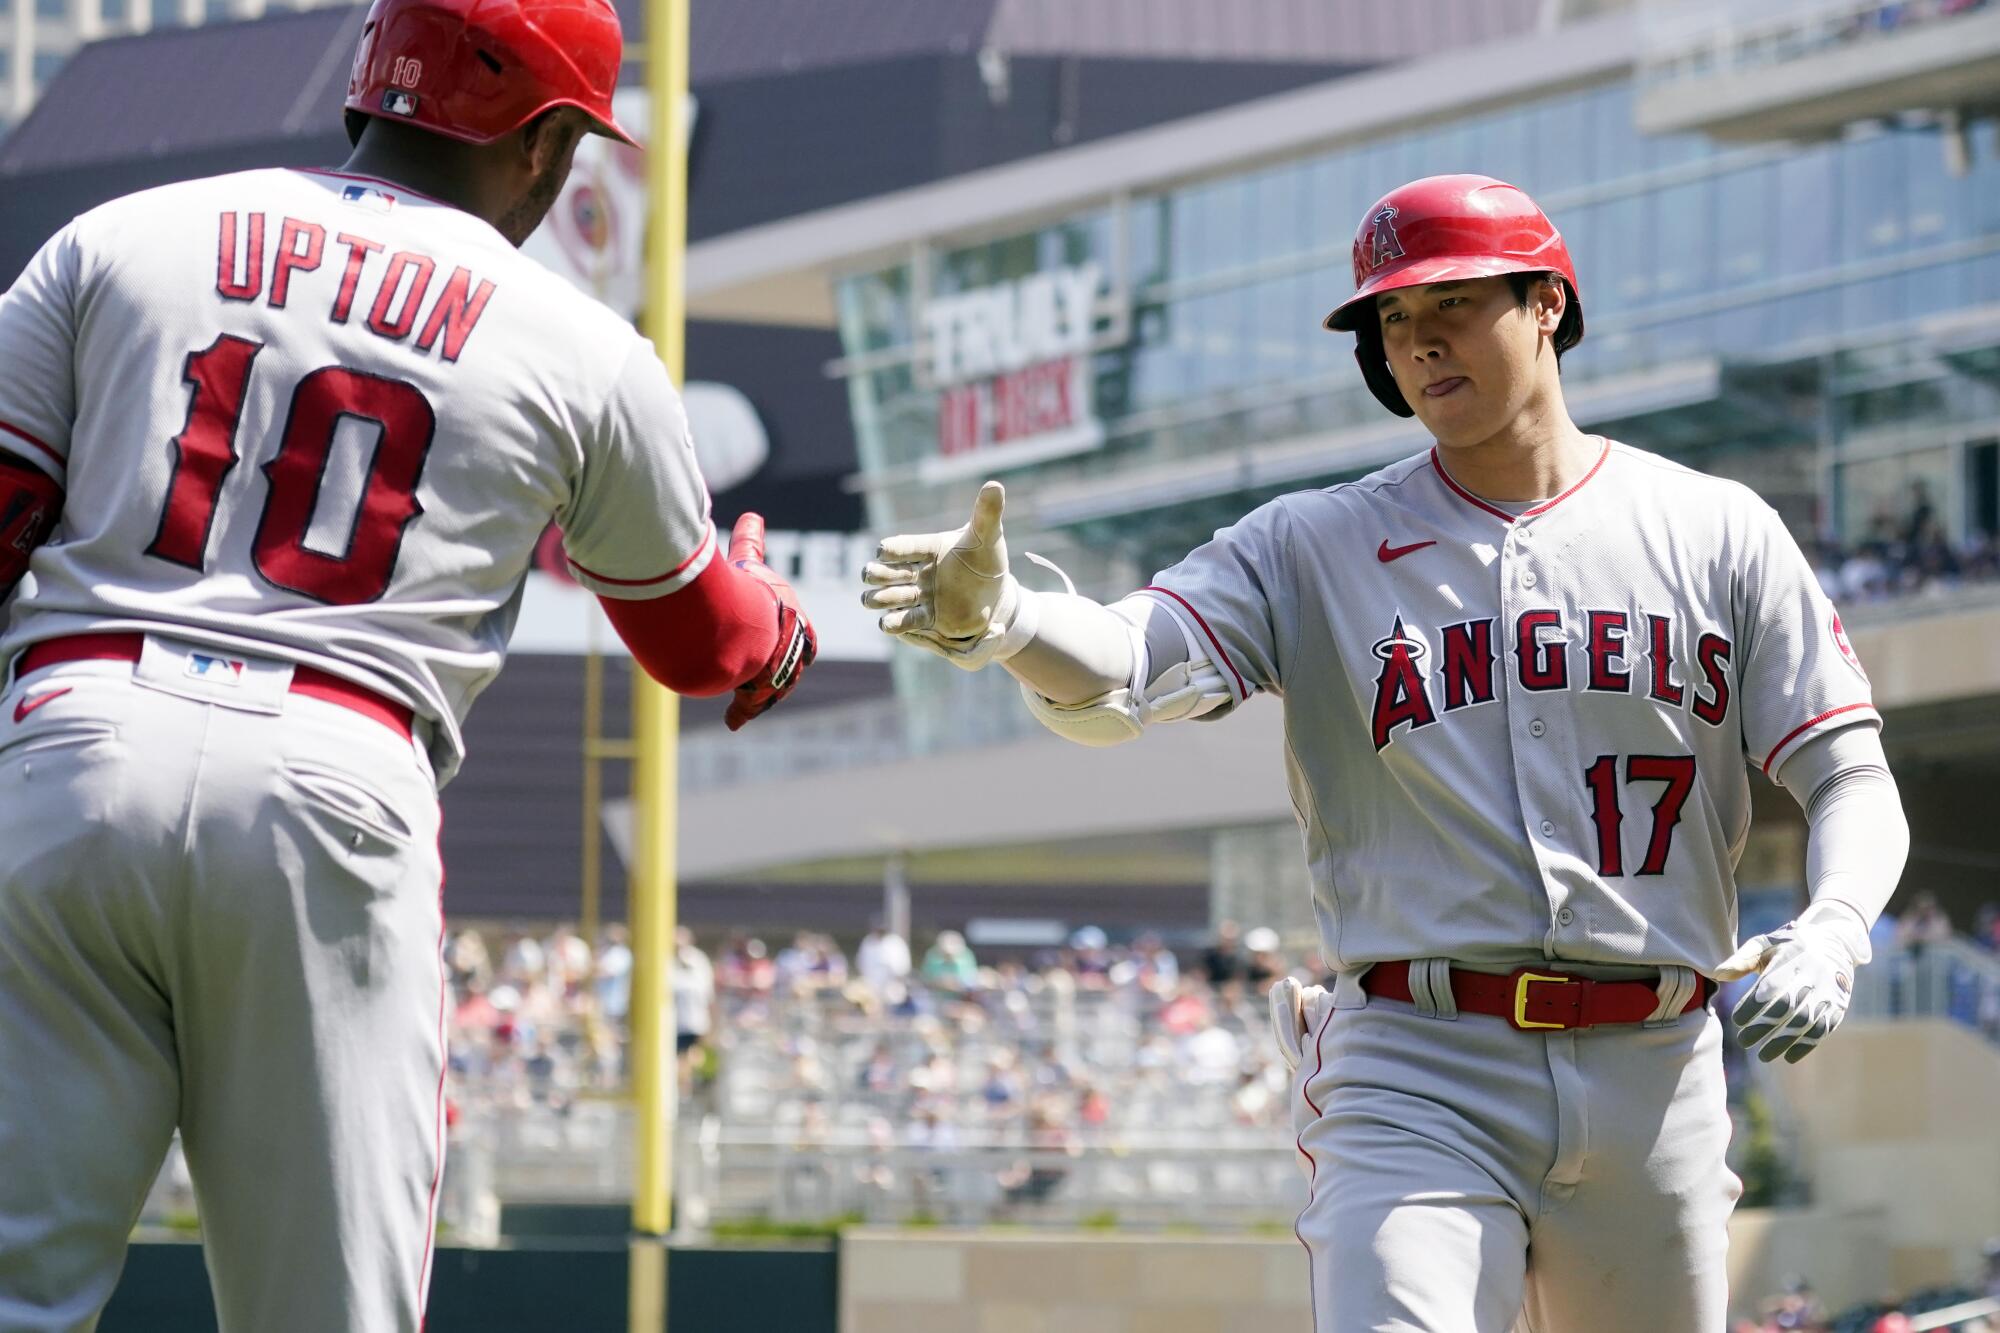 Rays will make a call on Shohei Ohtani. But a deal? Don't count on it.